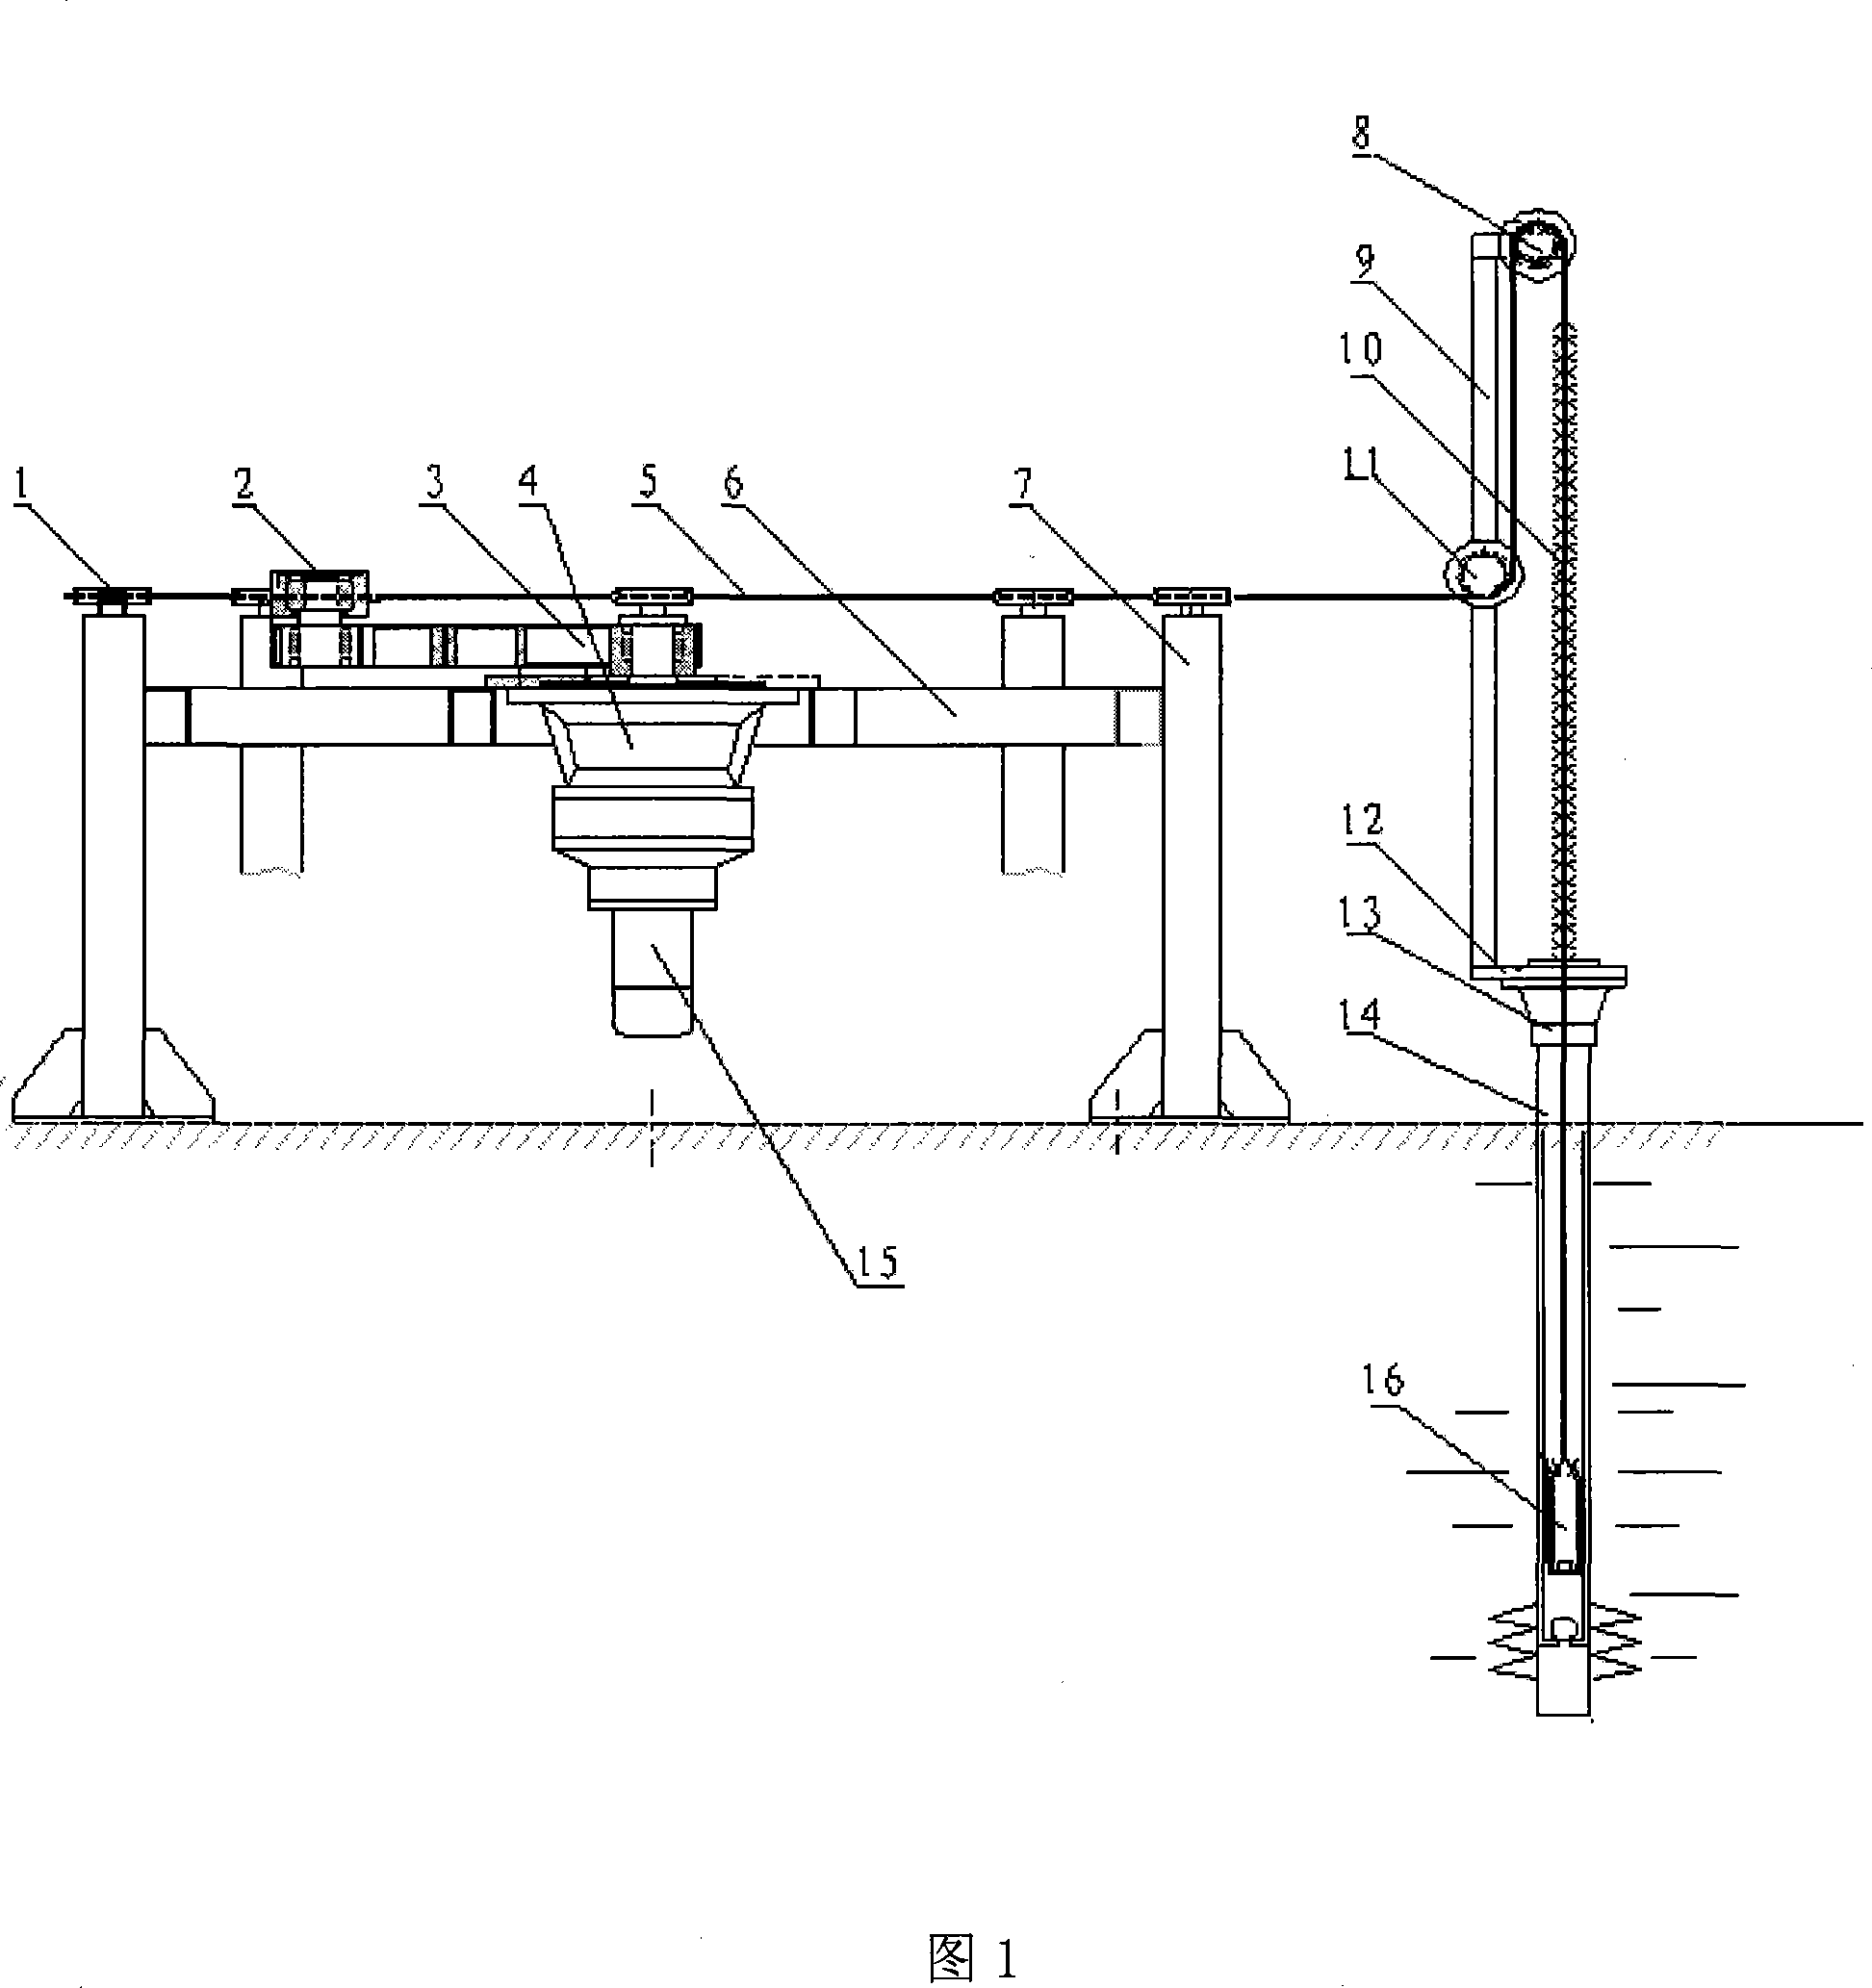 Integrated pumping unit